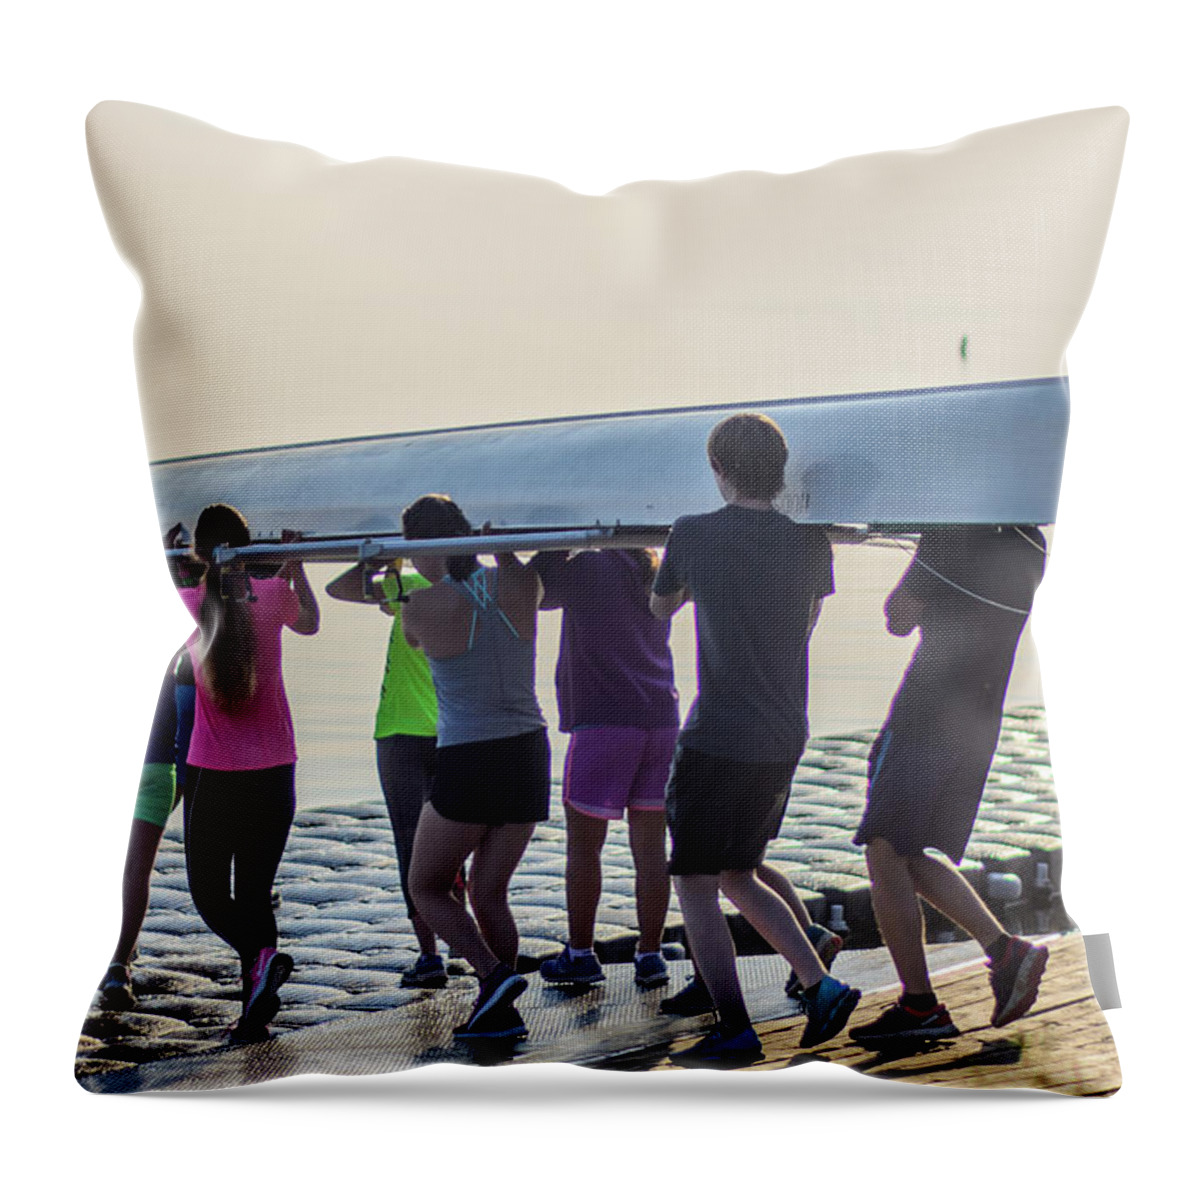 Putting The Canoe In The Water On Lake Simcoe Throw Pillow featuring the photograph All Together Now by James Canning